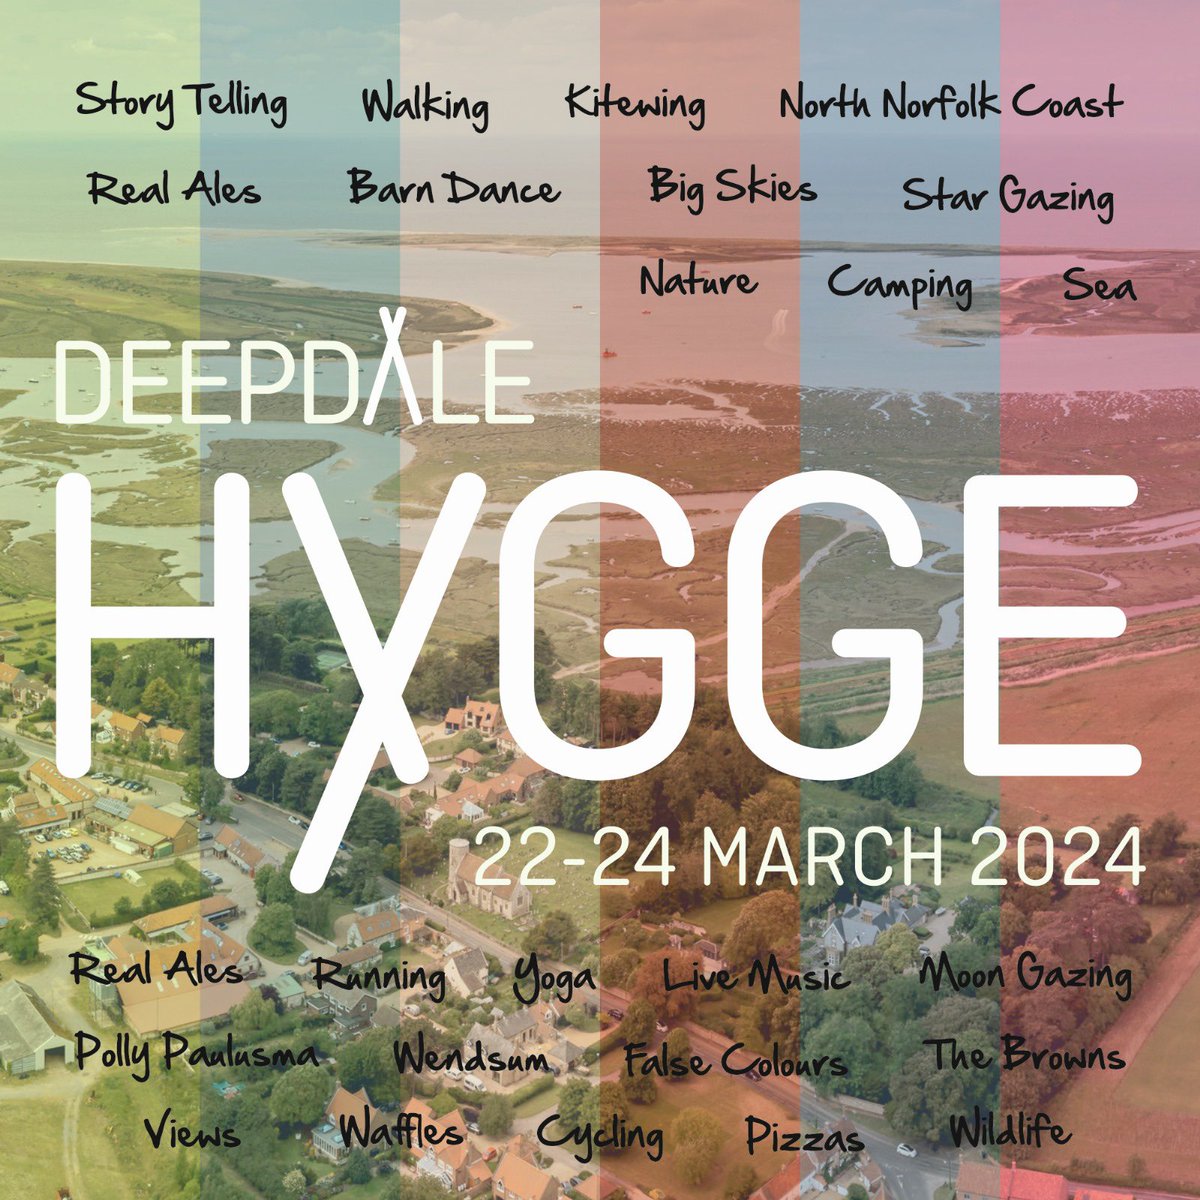 Two weeks today we’ll be getting ready for the Deepdale Hygge. Our original festival, we’ll be exploring our love of the Norfolk Coast, with guided nature, photography and bird walks, cycle ride, crafting, storytelling, yoga, local food and drink, and of course some great music!